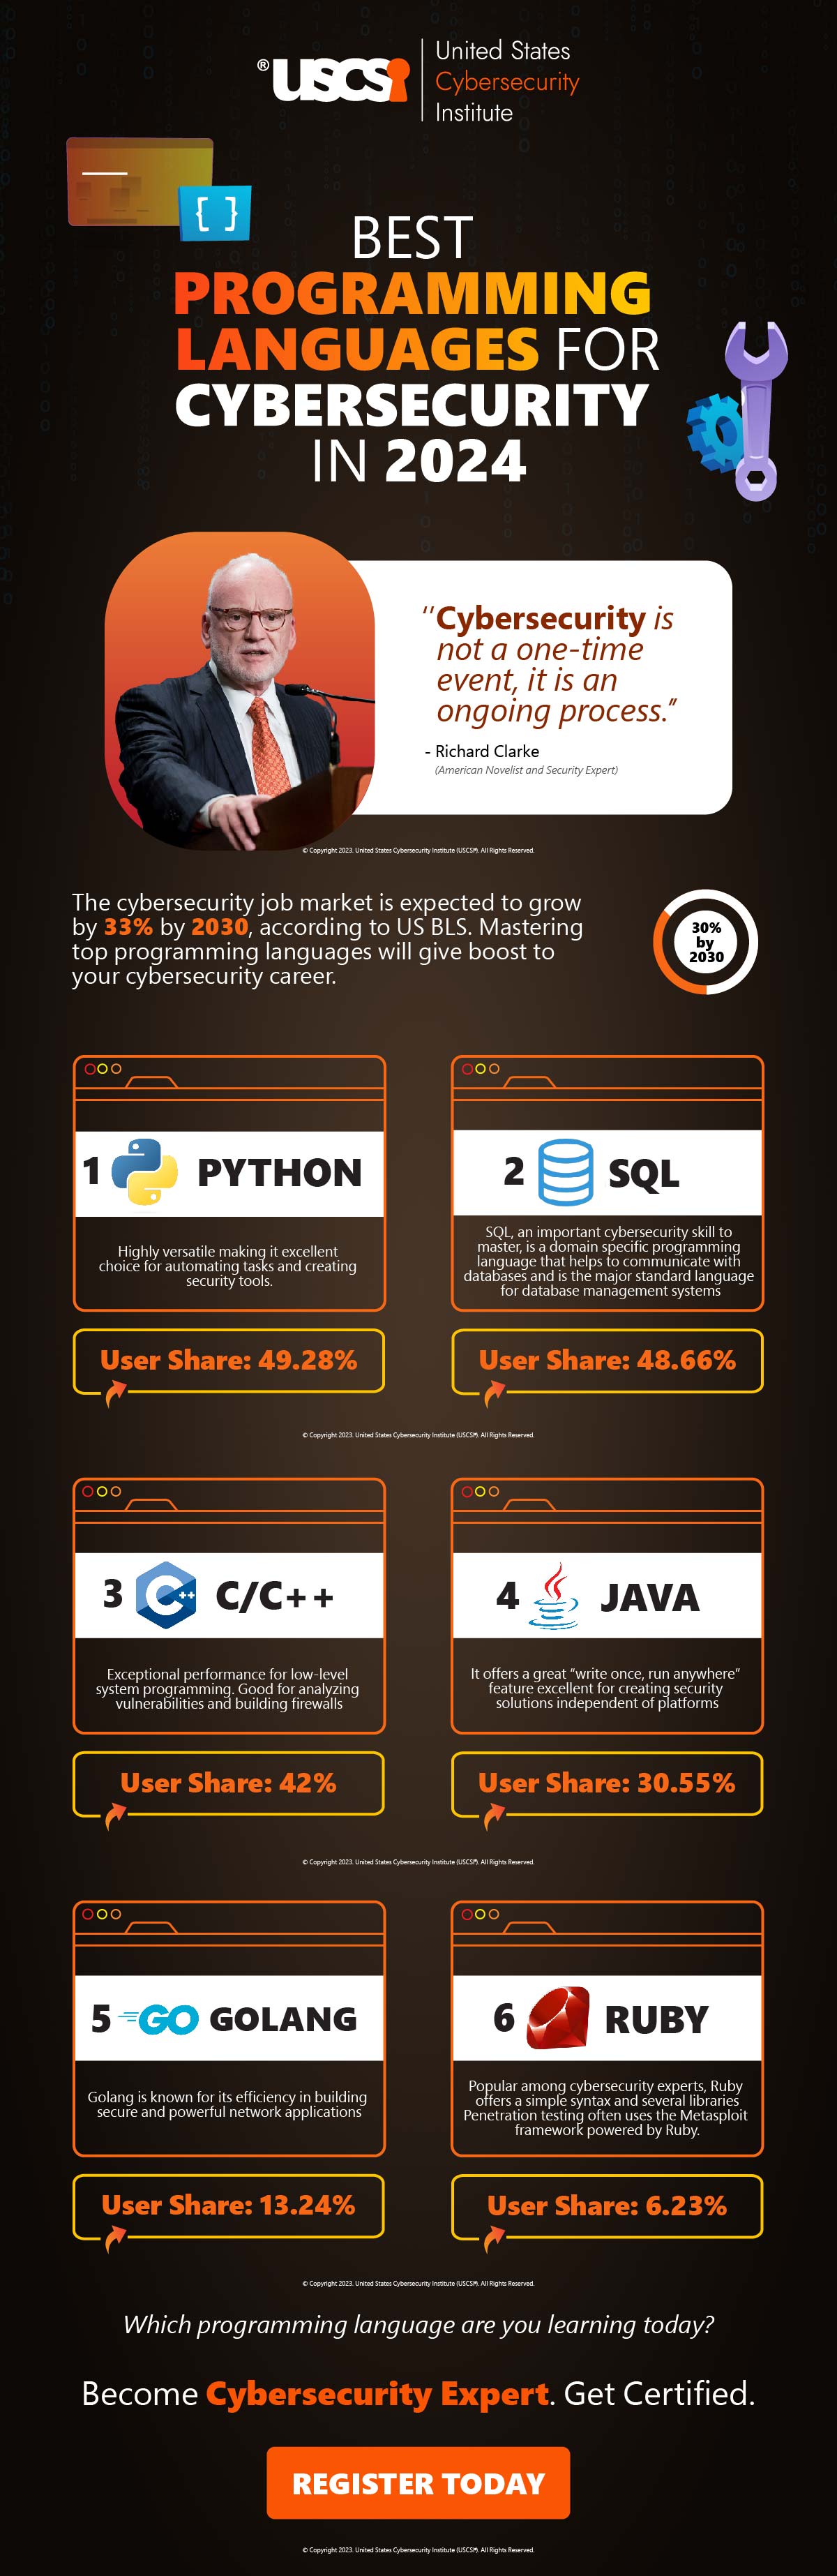 Best Programming Languages for Cybersecurity in 2024